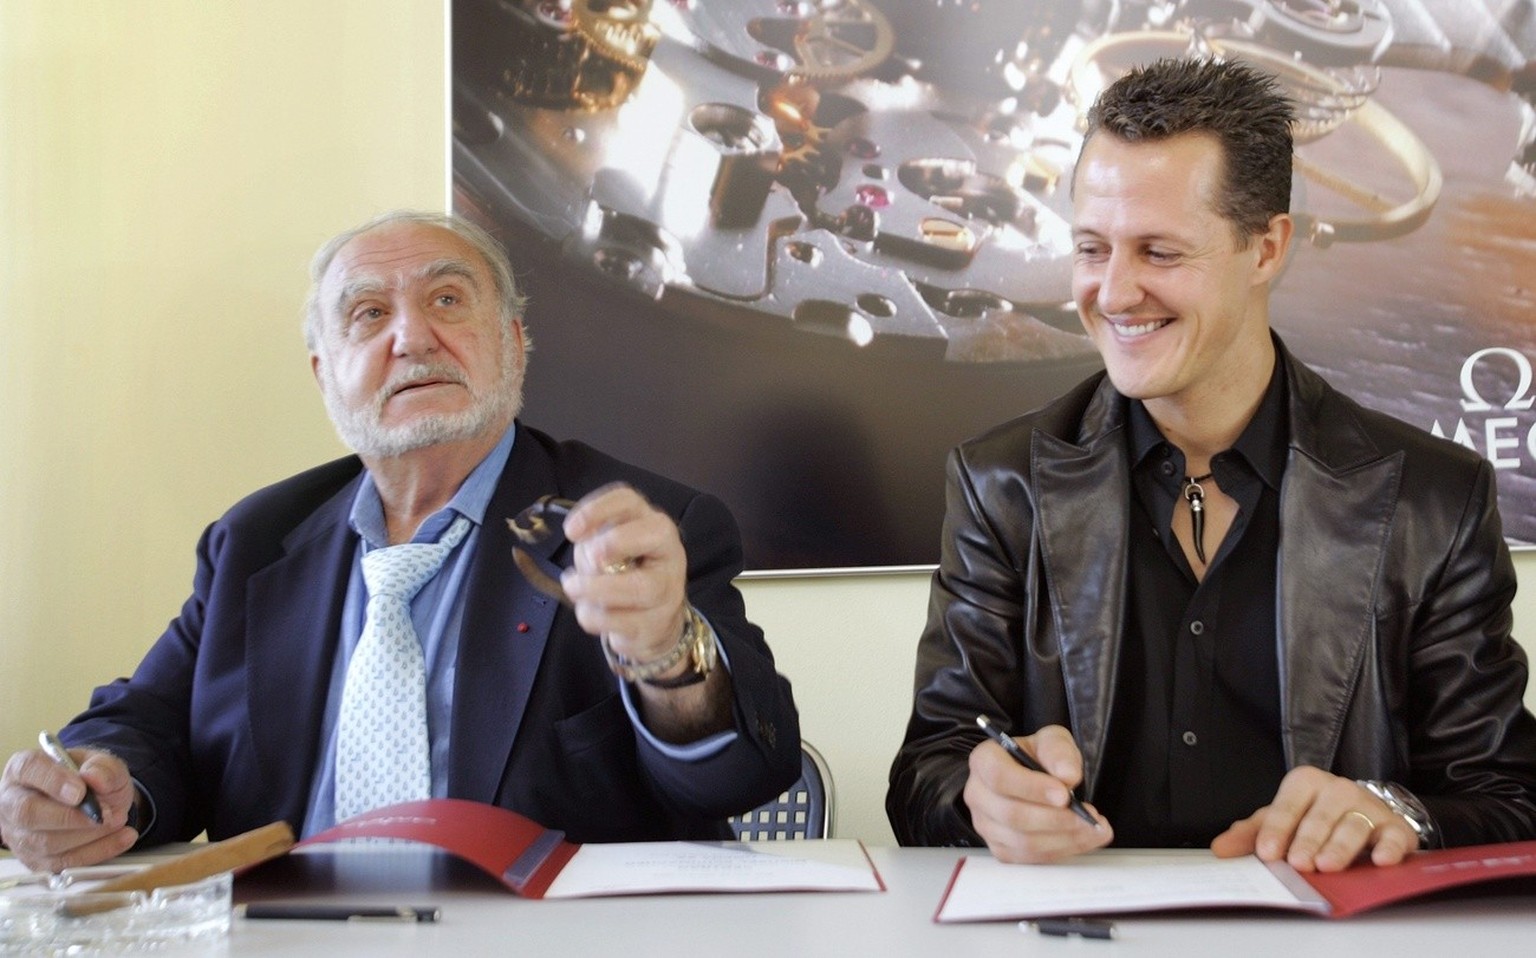 Seven-times Formula 1 World Champion Michael Schumacher, right, and Nicolas G. Hayek from Switzerland, Chairman of the Board of Swatch Group, sign the extension of the partnership between the German p ...